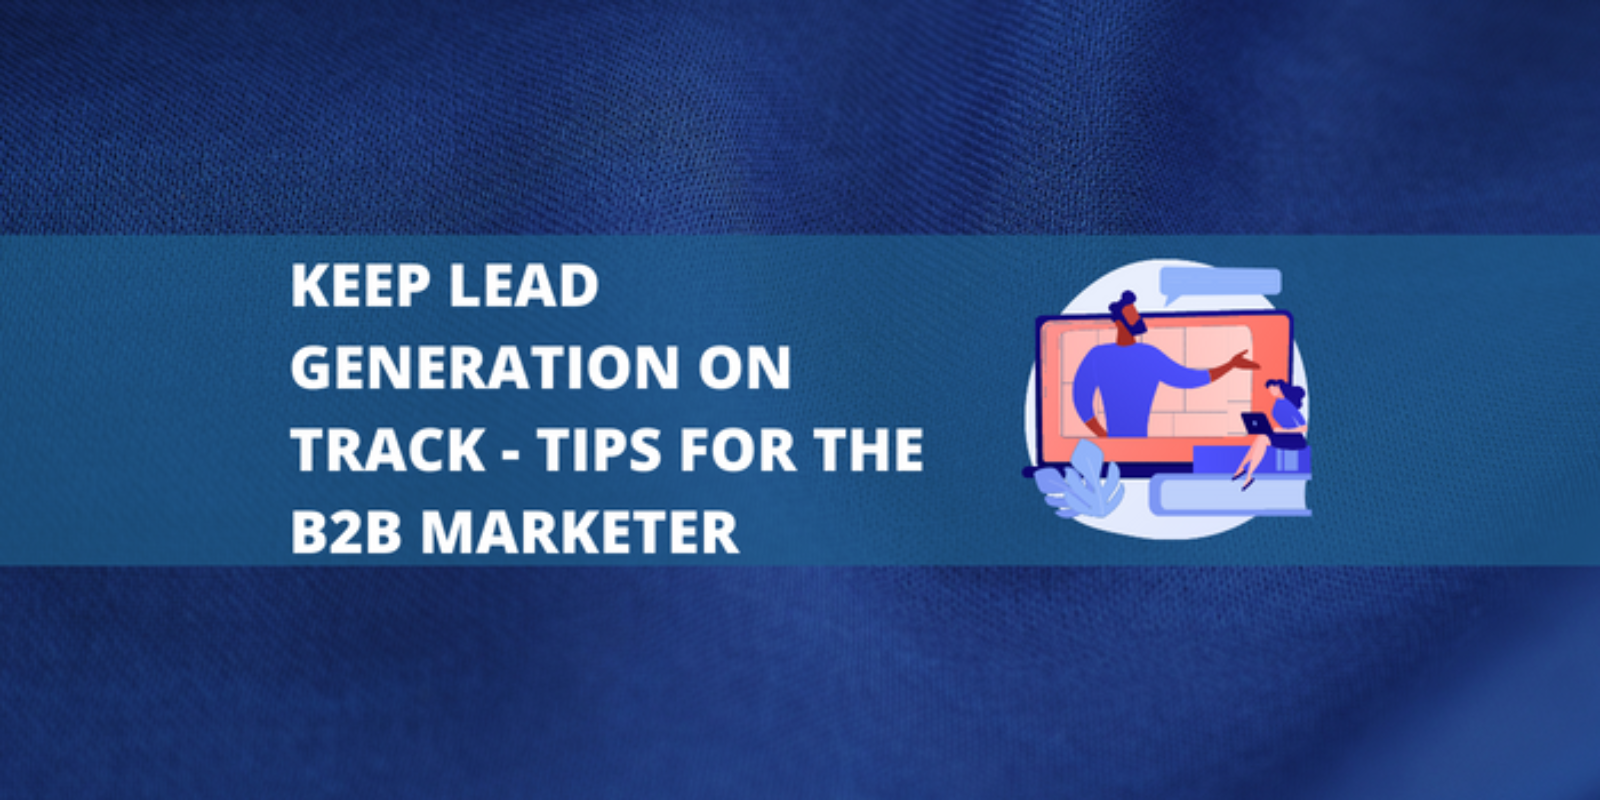 Keep Lead Generation on Track – Tips for the B2B Marketer